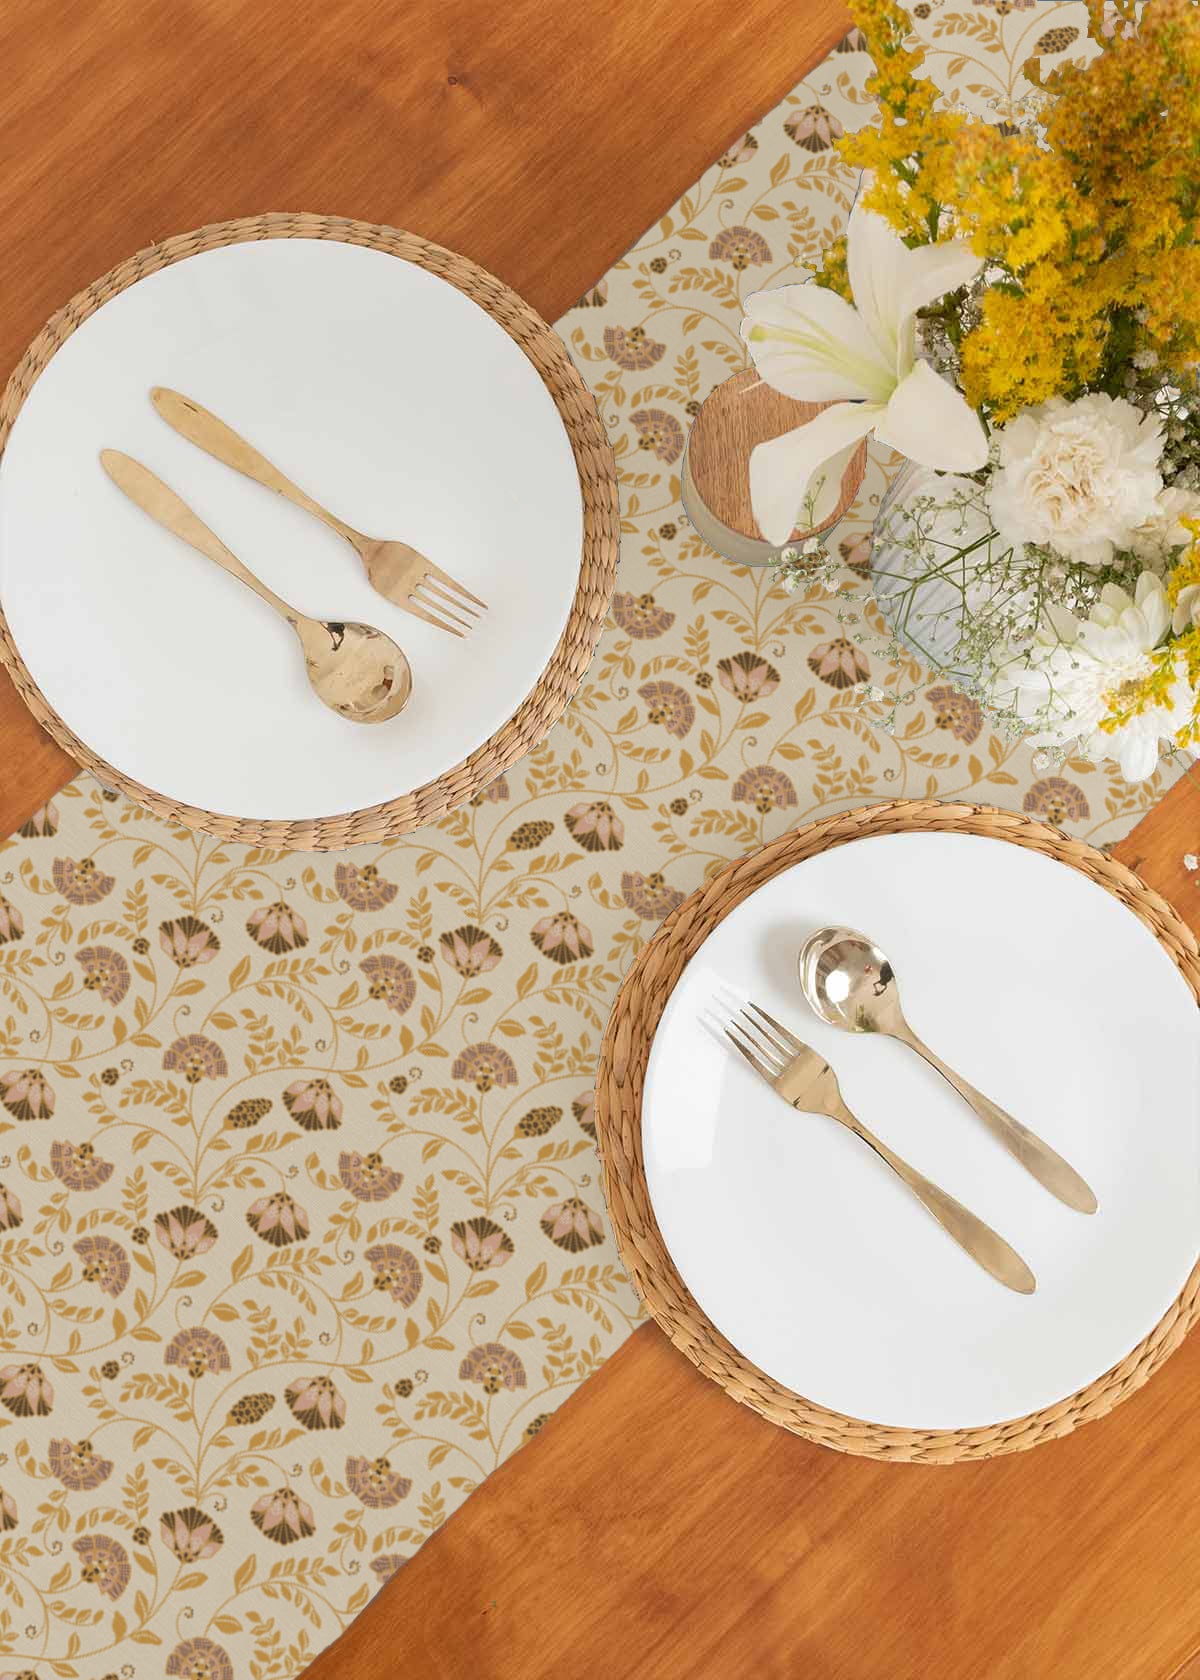 Calico Printed Cotton Table Runner - Beige